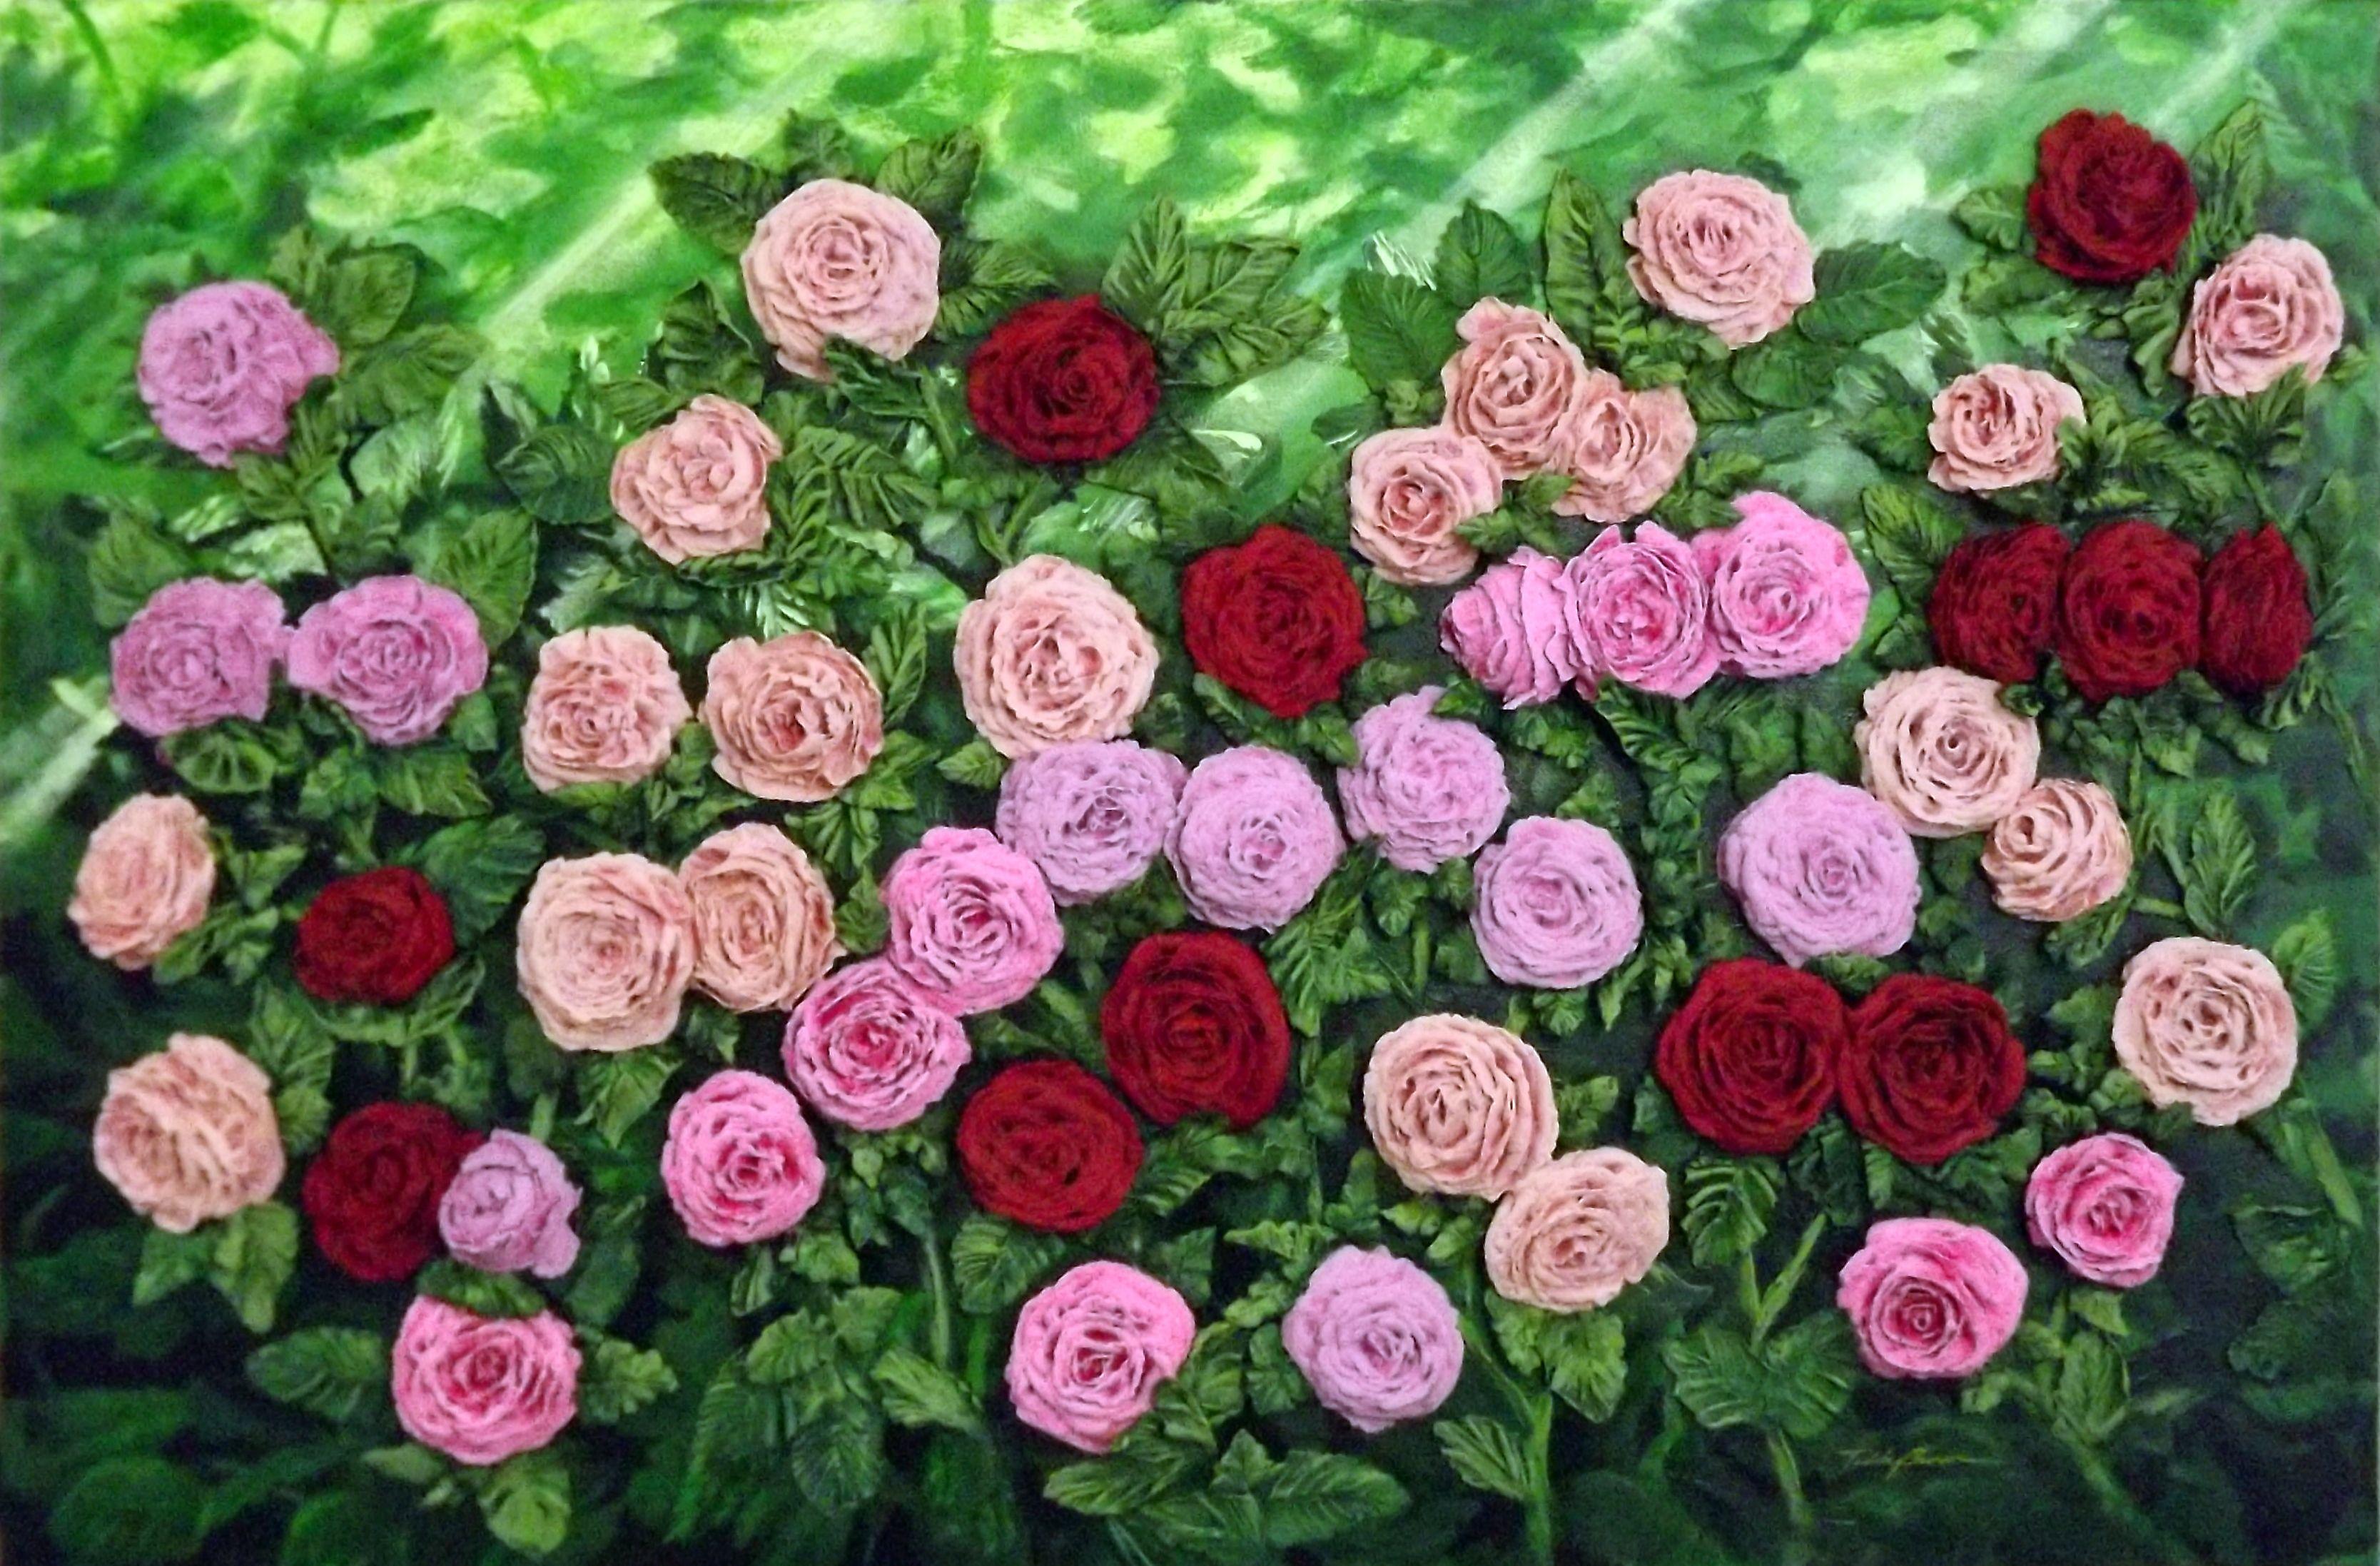 Wild Buttercream Roses, Mixed Media on Canvas - Mixed Media Art by Teddy Brown